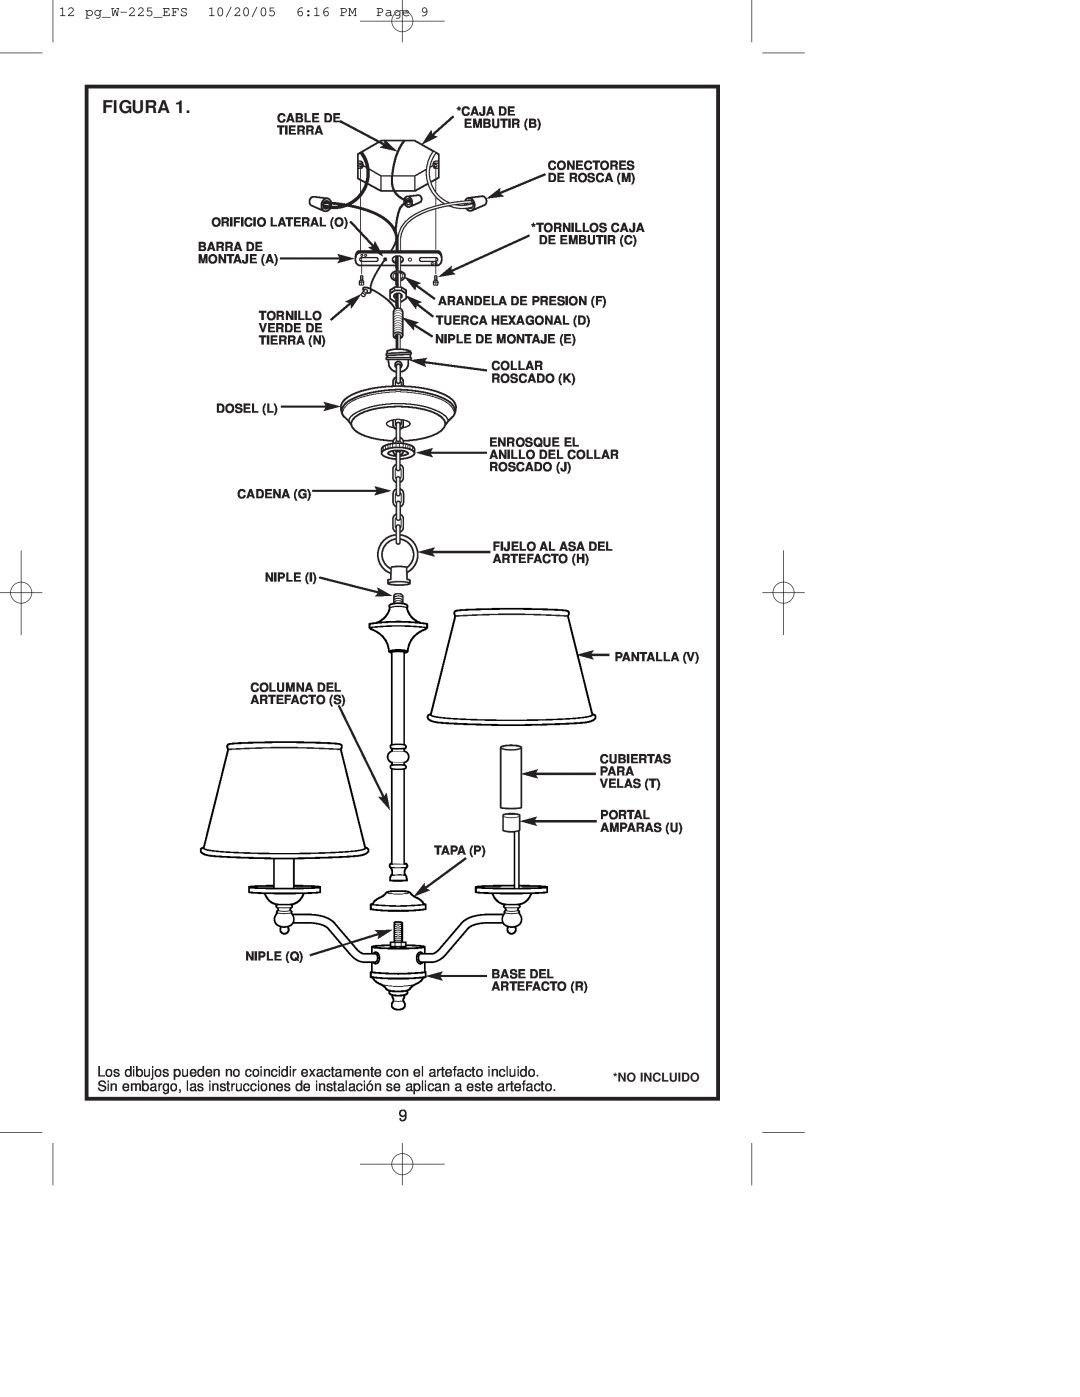 Westinghouse owner manual Figura, 12 pg_W-225_EFS10/20/05 6:16 PM Page 